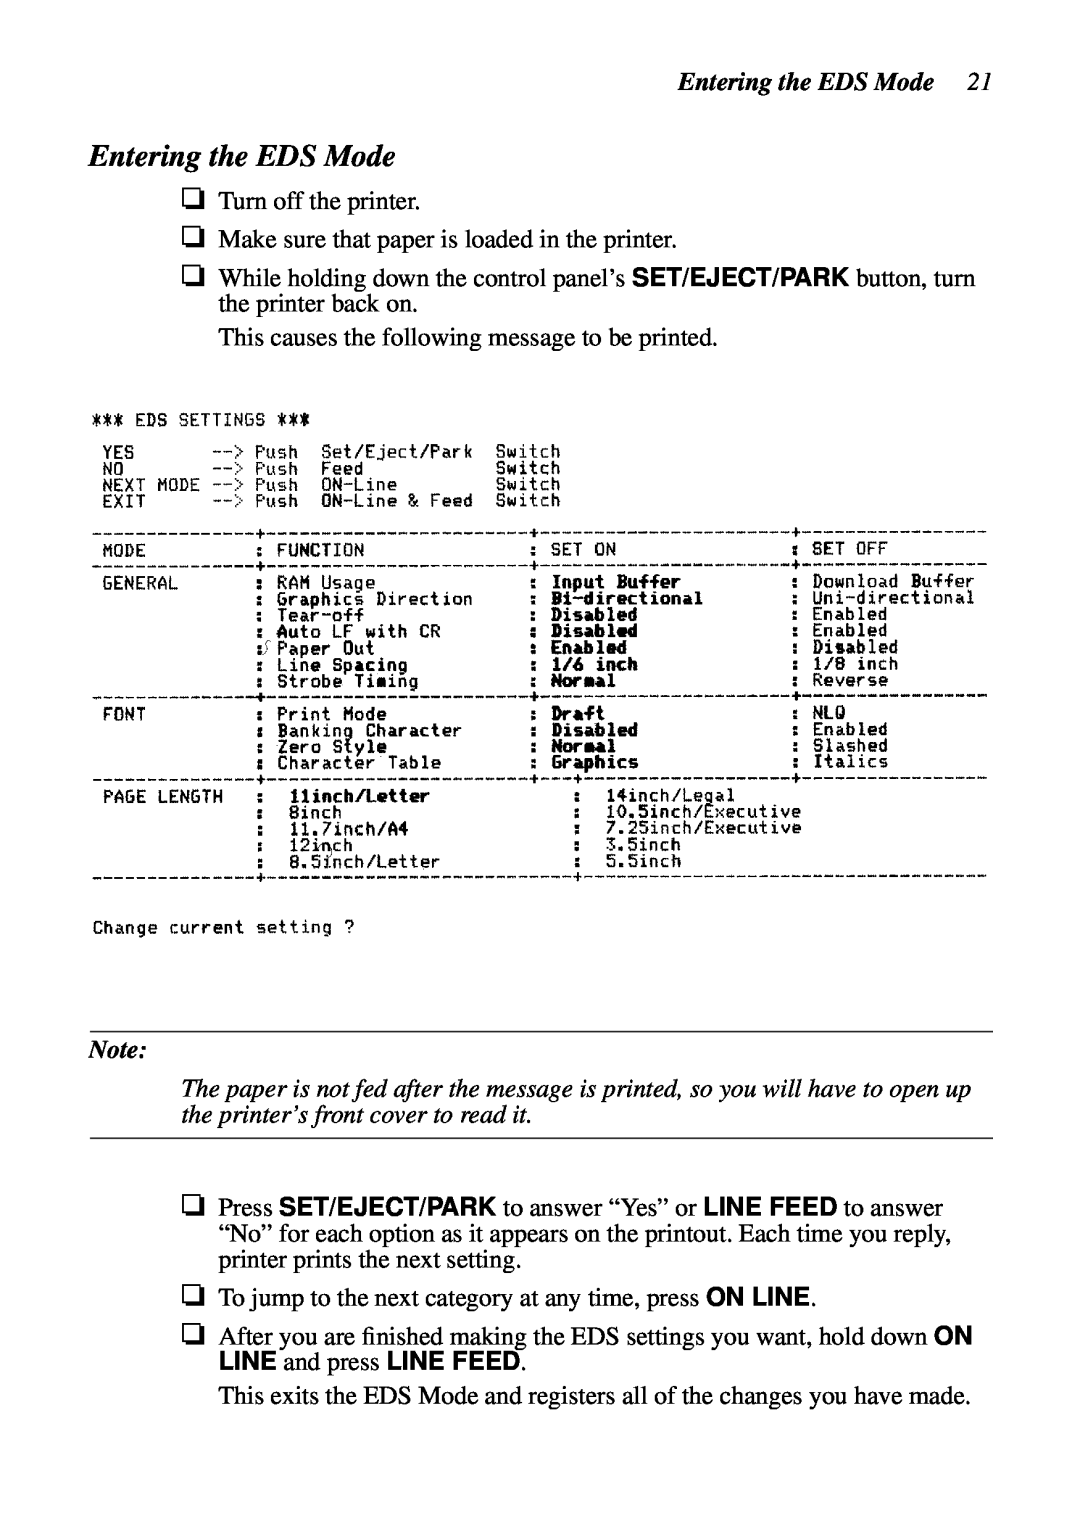 Star Micronics LC-6211 user manual Entering the EDS Mode 